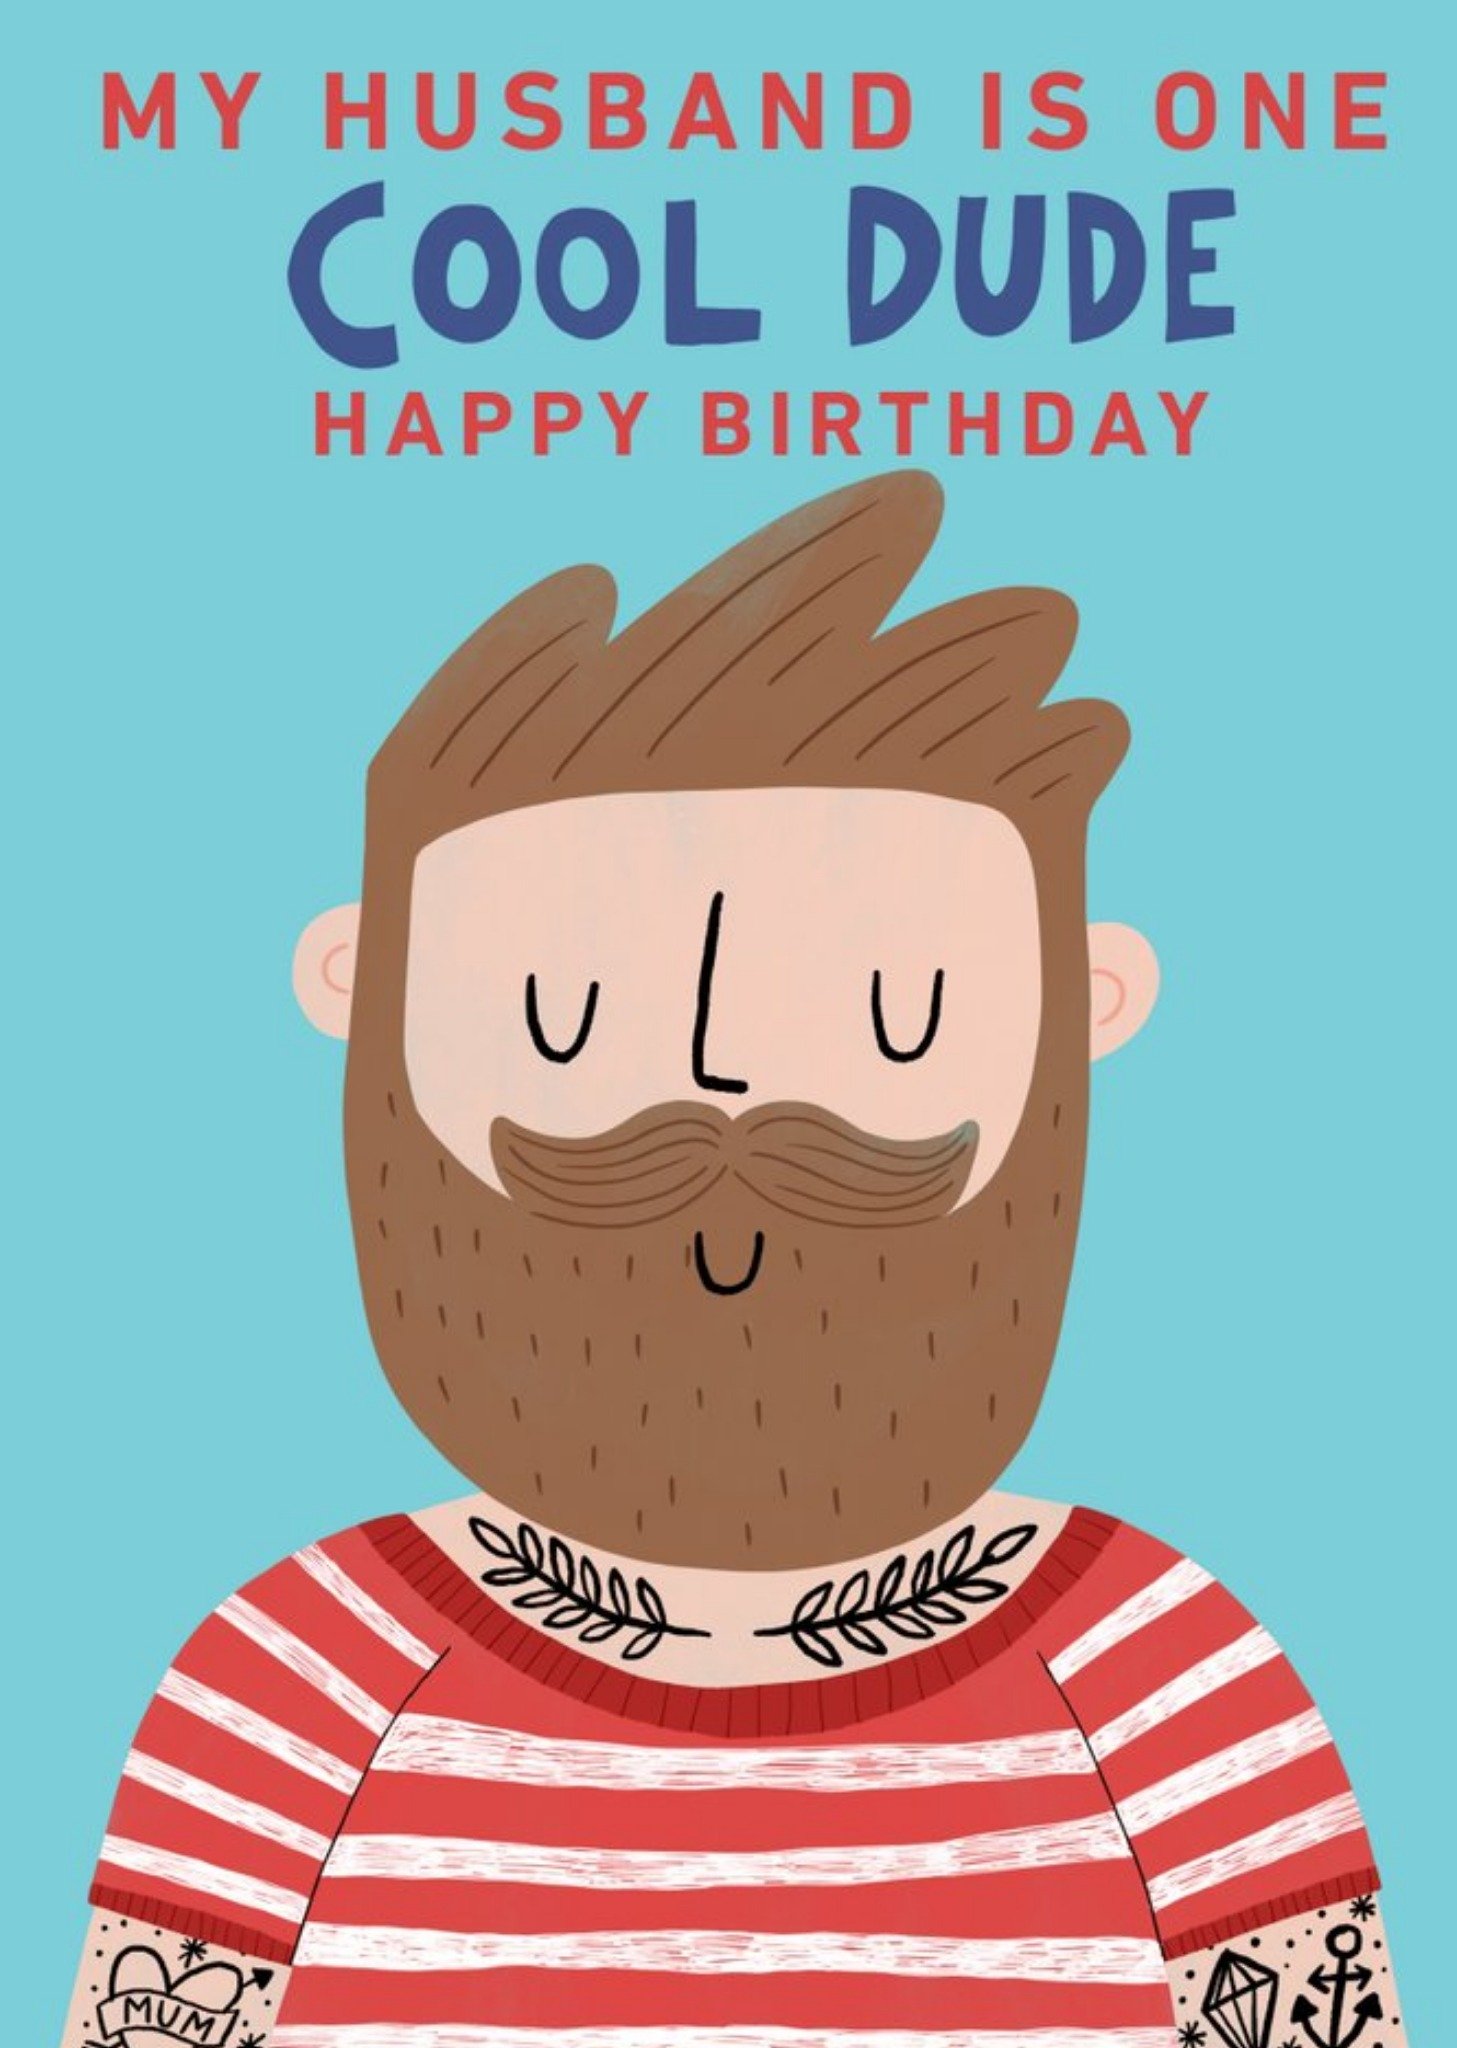 Other Yay Today Illustrated My Husband Is One Cool Dude Birthday Card Ecard